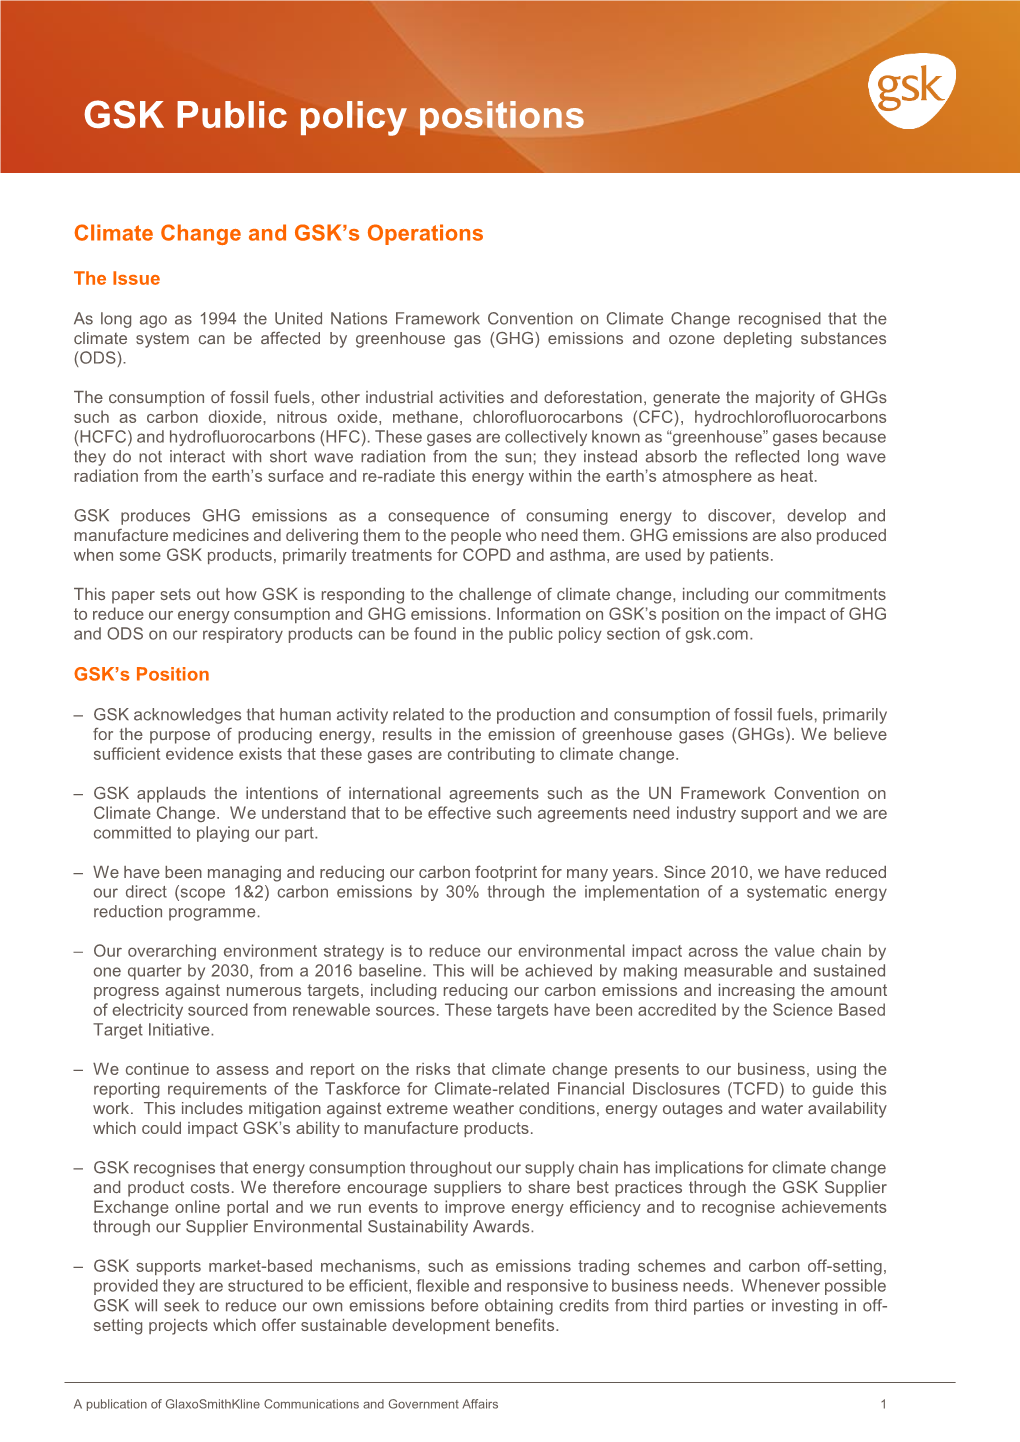 GSK Public Policy Positions